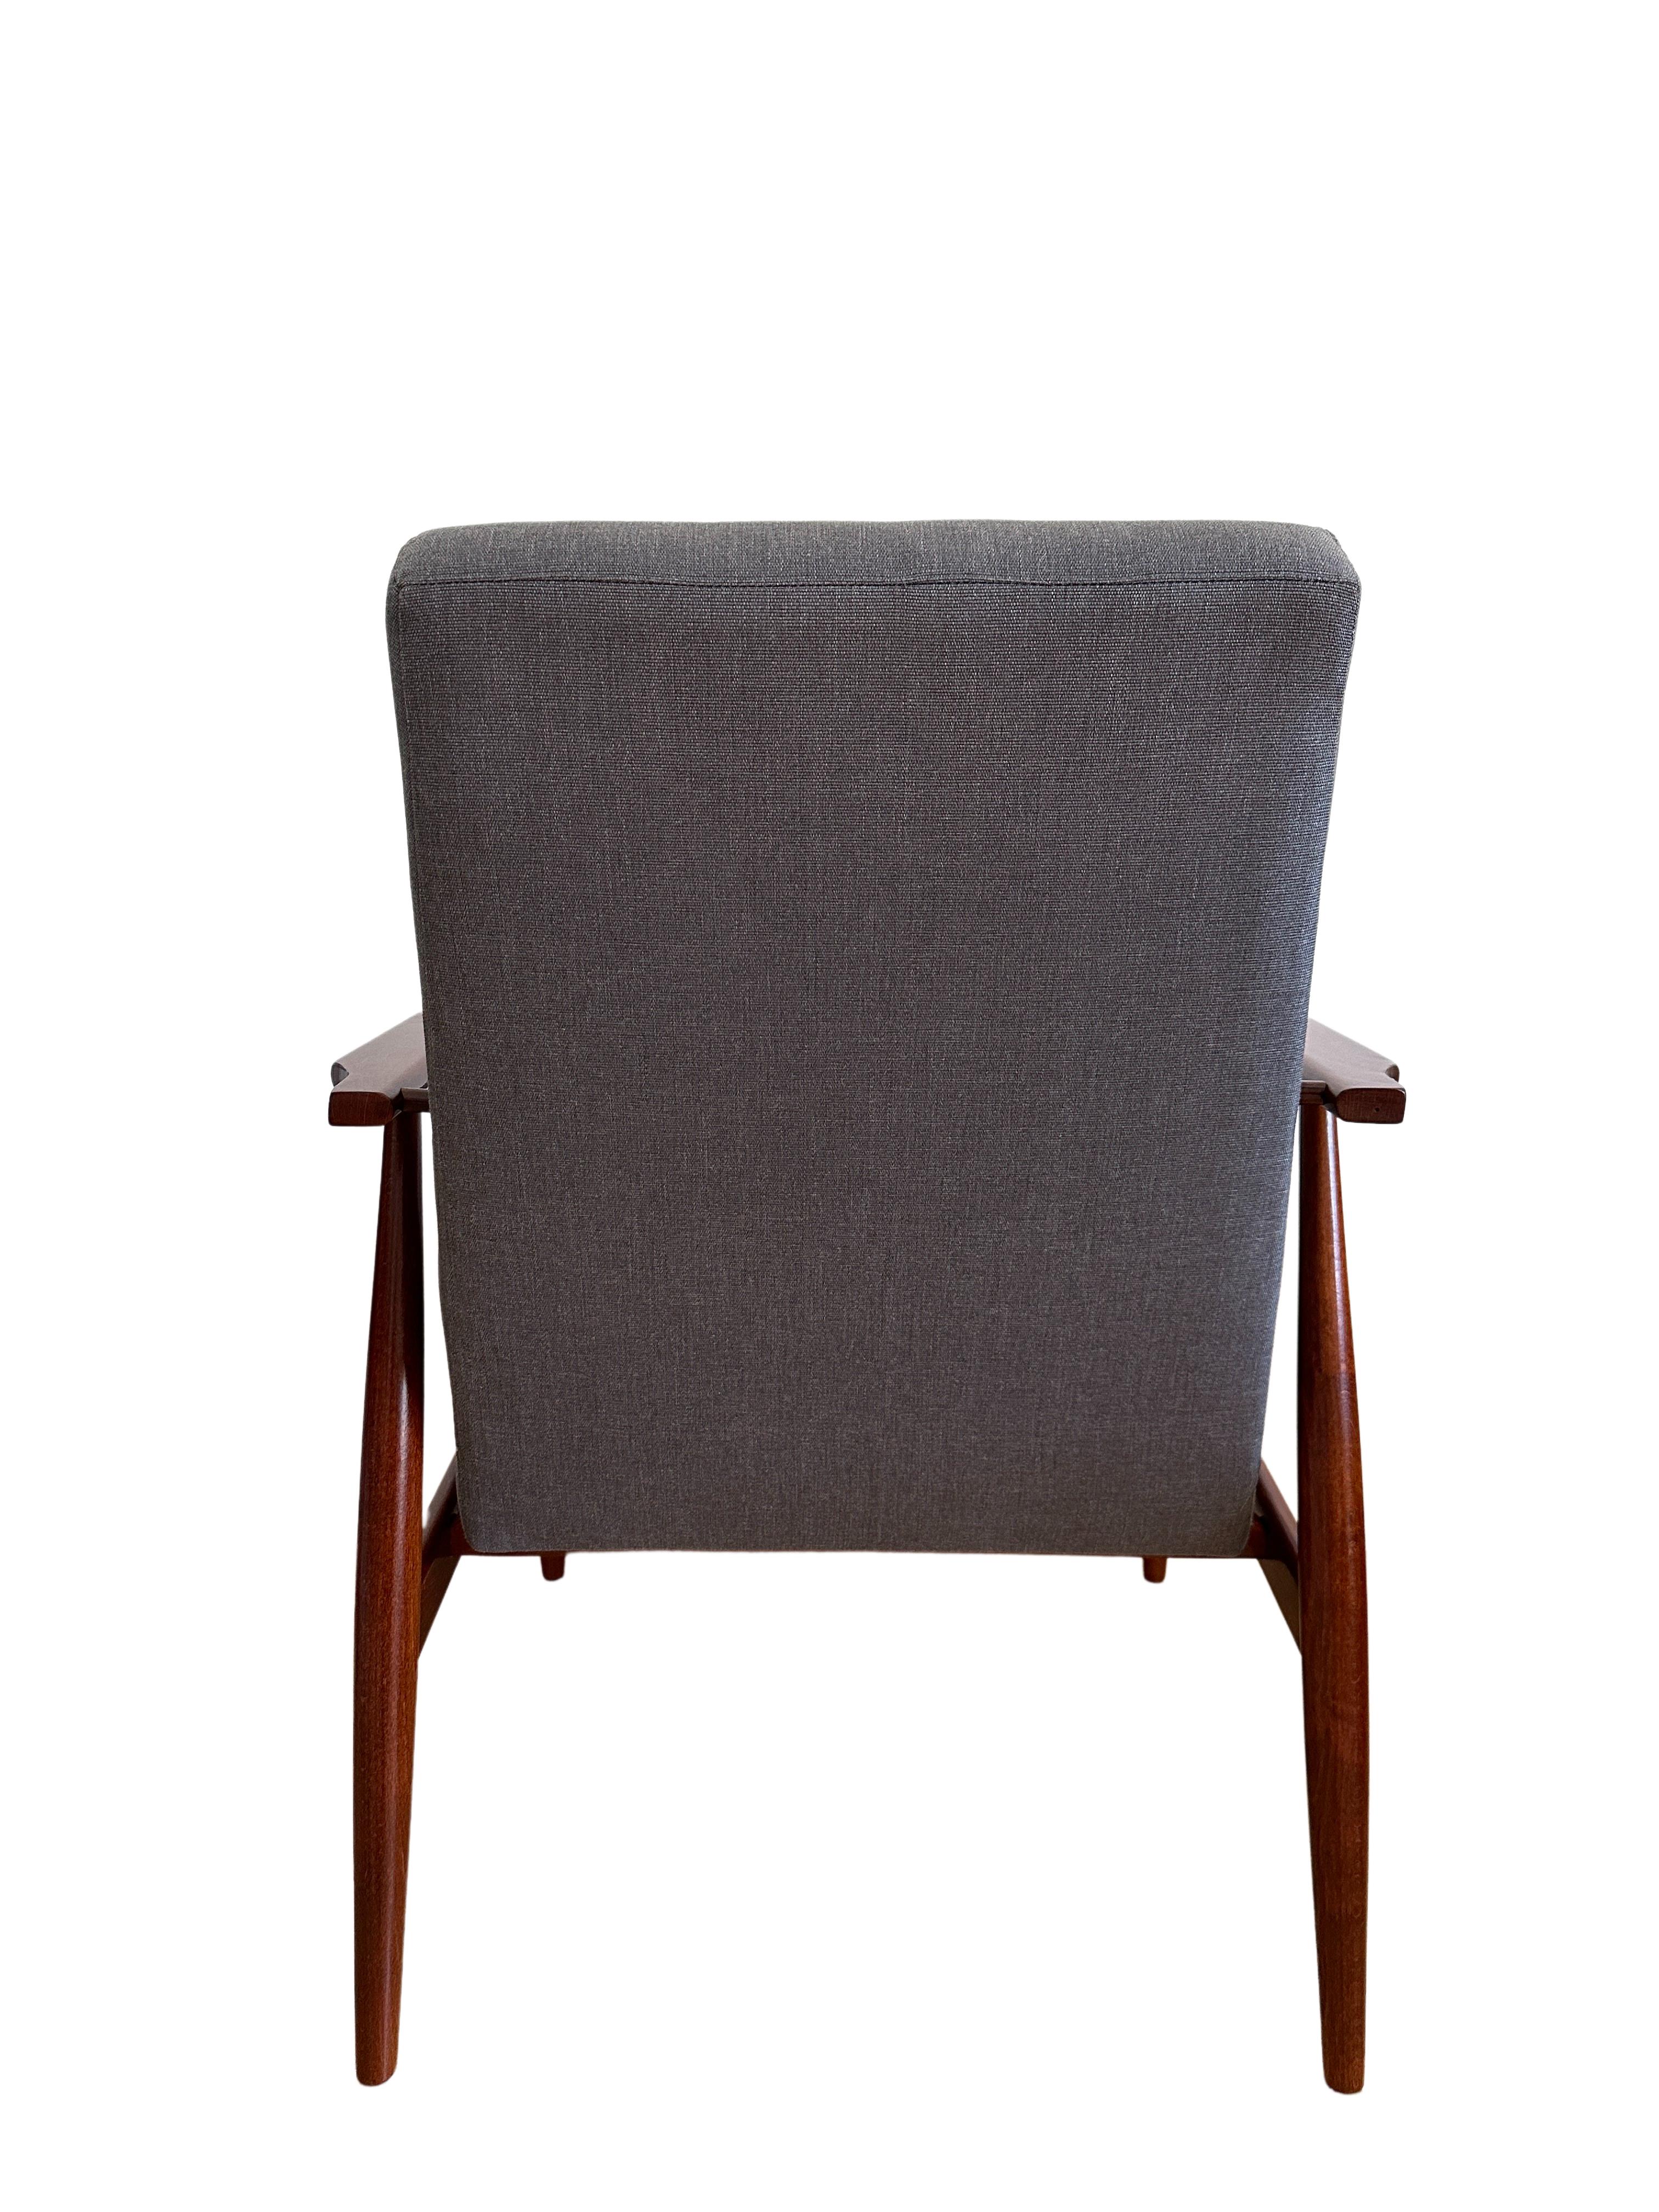 Hand-Crafted Midcentury Armchair in Kvadrat Upholstery by Henryk Lis, Europe, 1960s For Sale